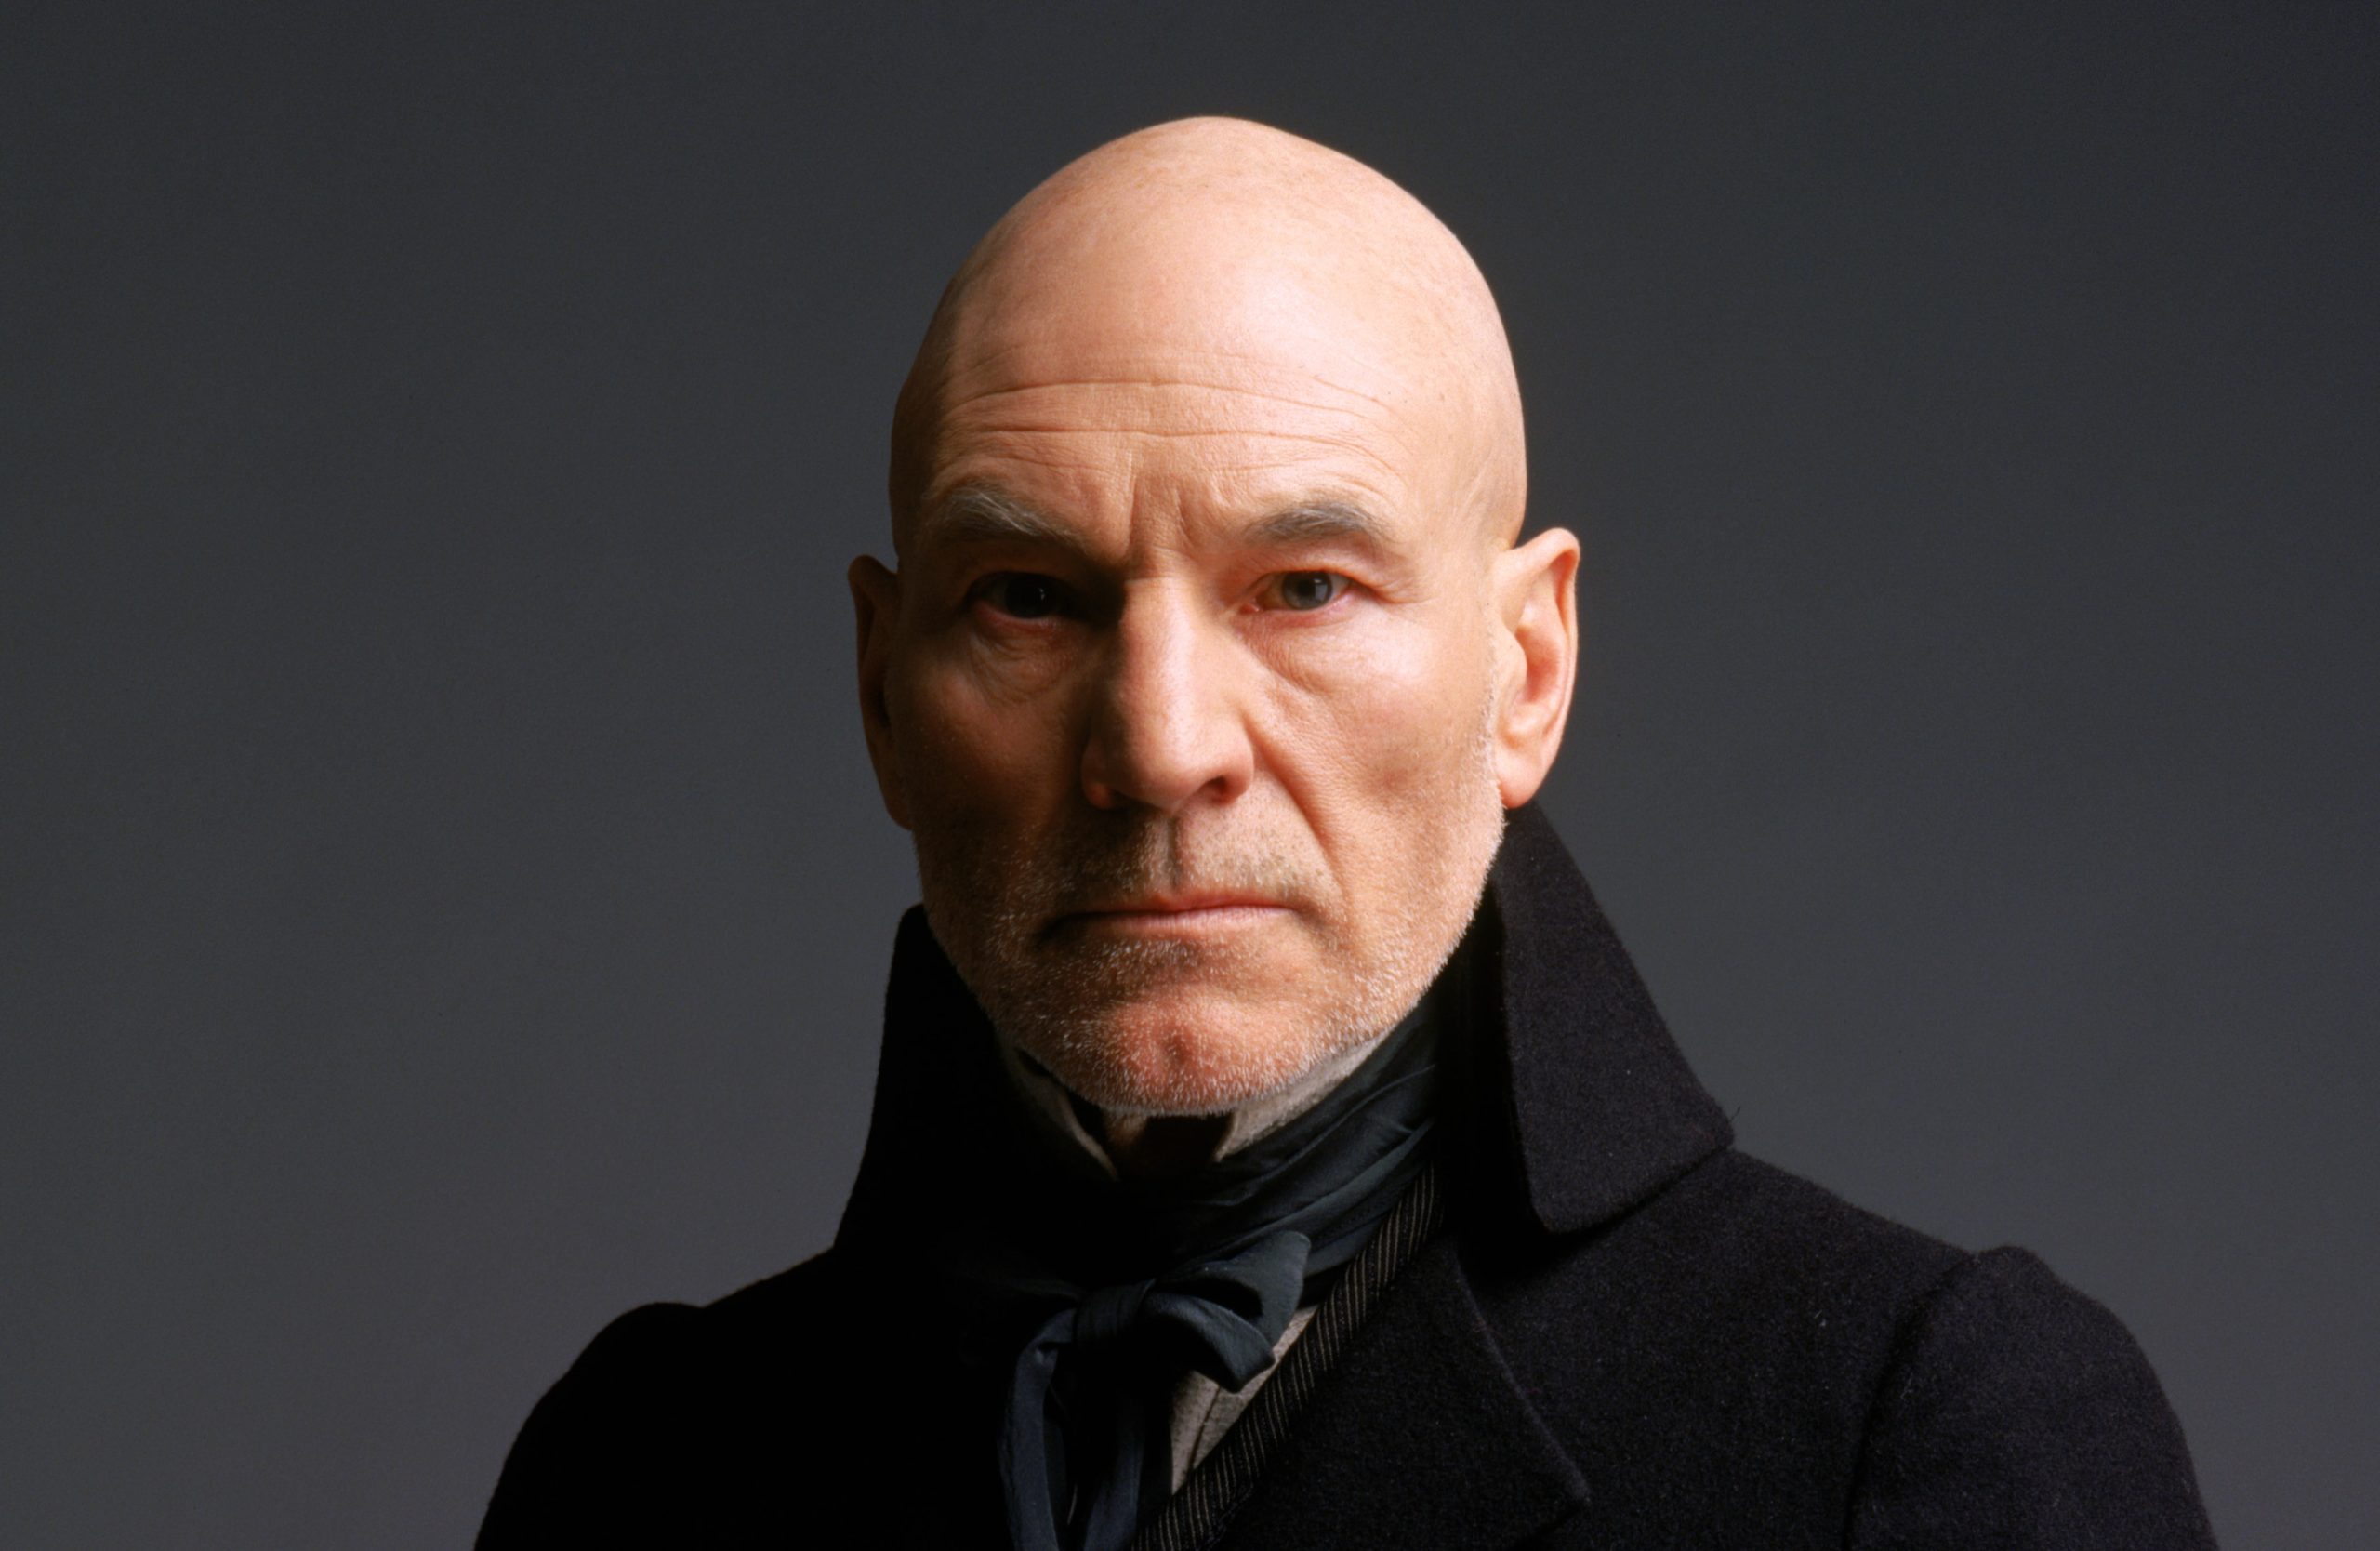 Patrick Stewart Biography Age Movies And Tv Shows Height Abtc 